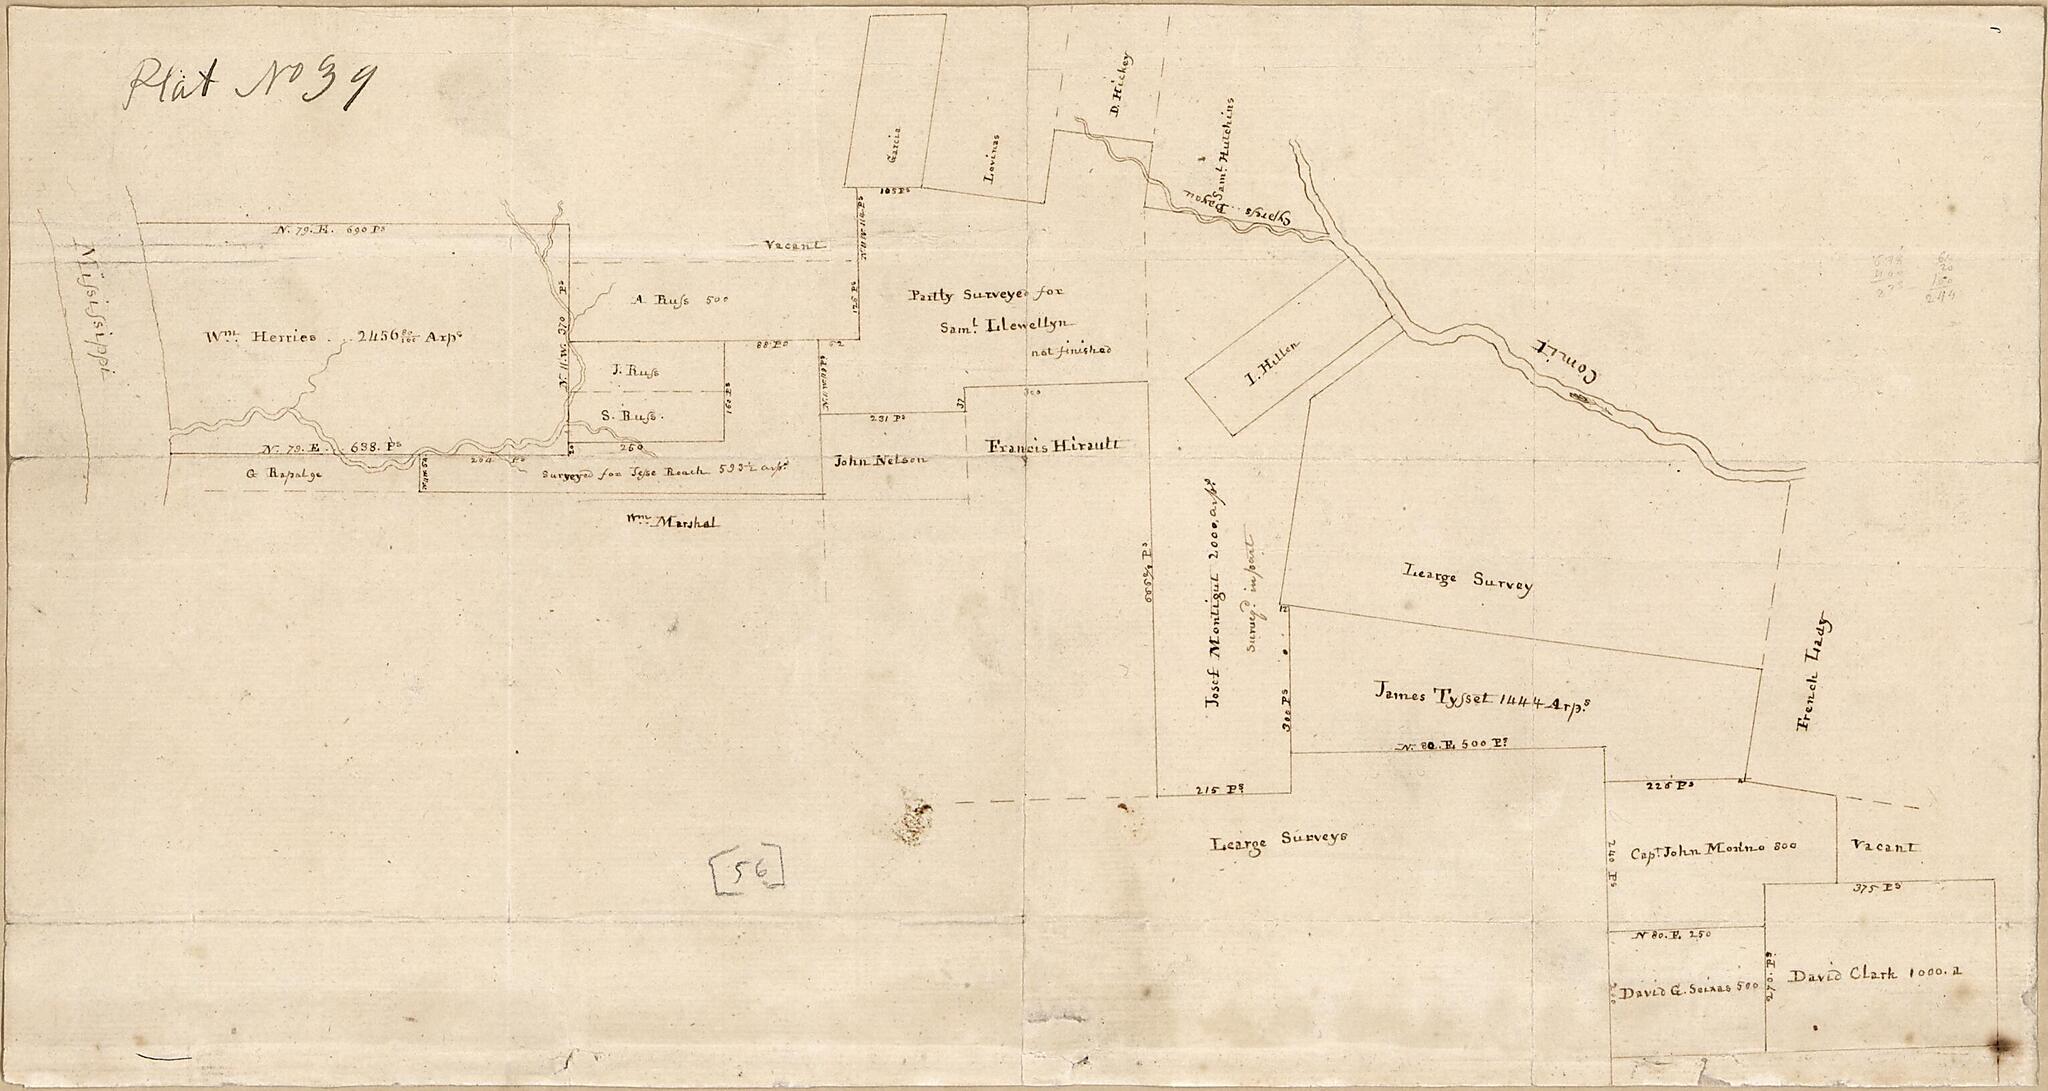 This old map of Cadastral Map of a Portion of Feliciana District, Spanish West Florida, Between the Mississippi River and the Comite River from 1805 was created by Vicente Sebastián Pintado in 1805